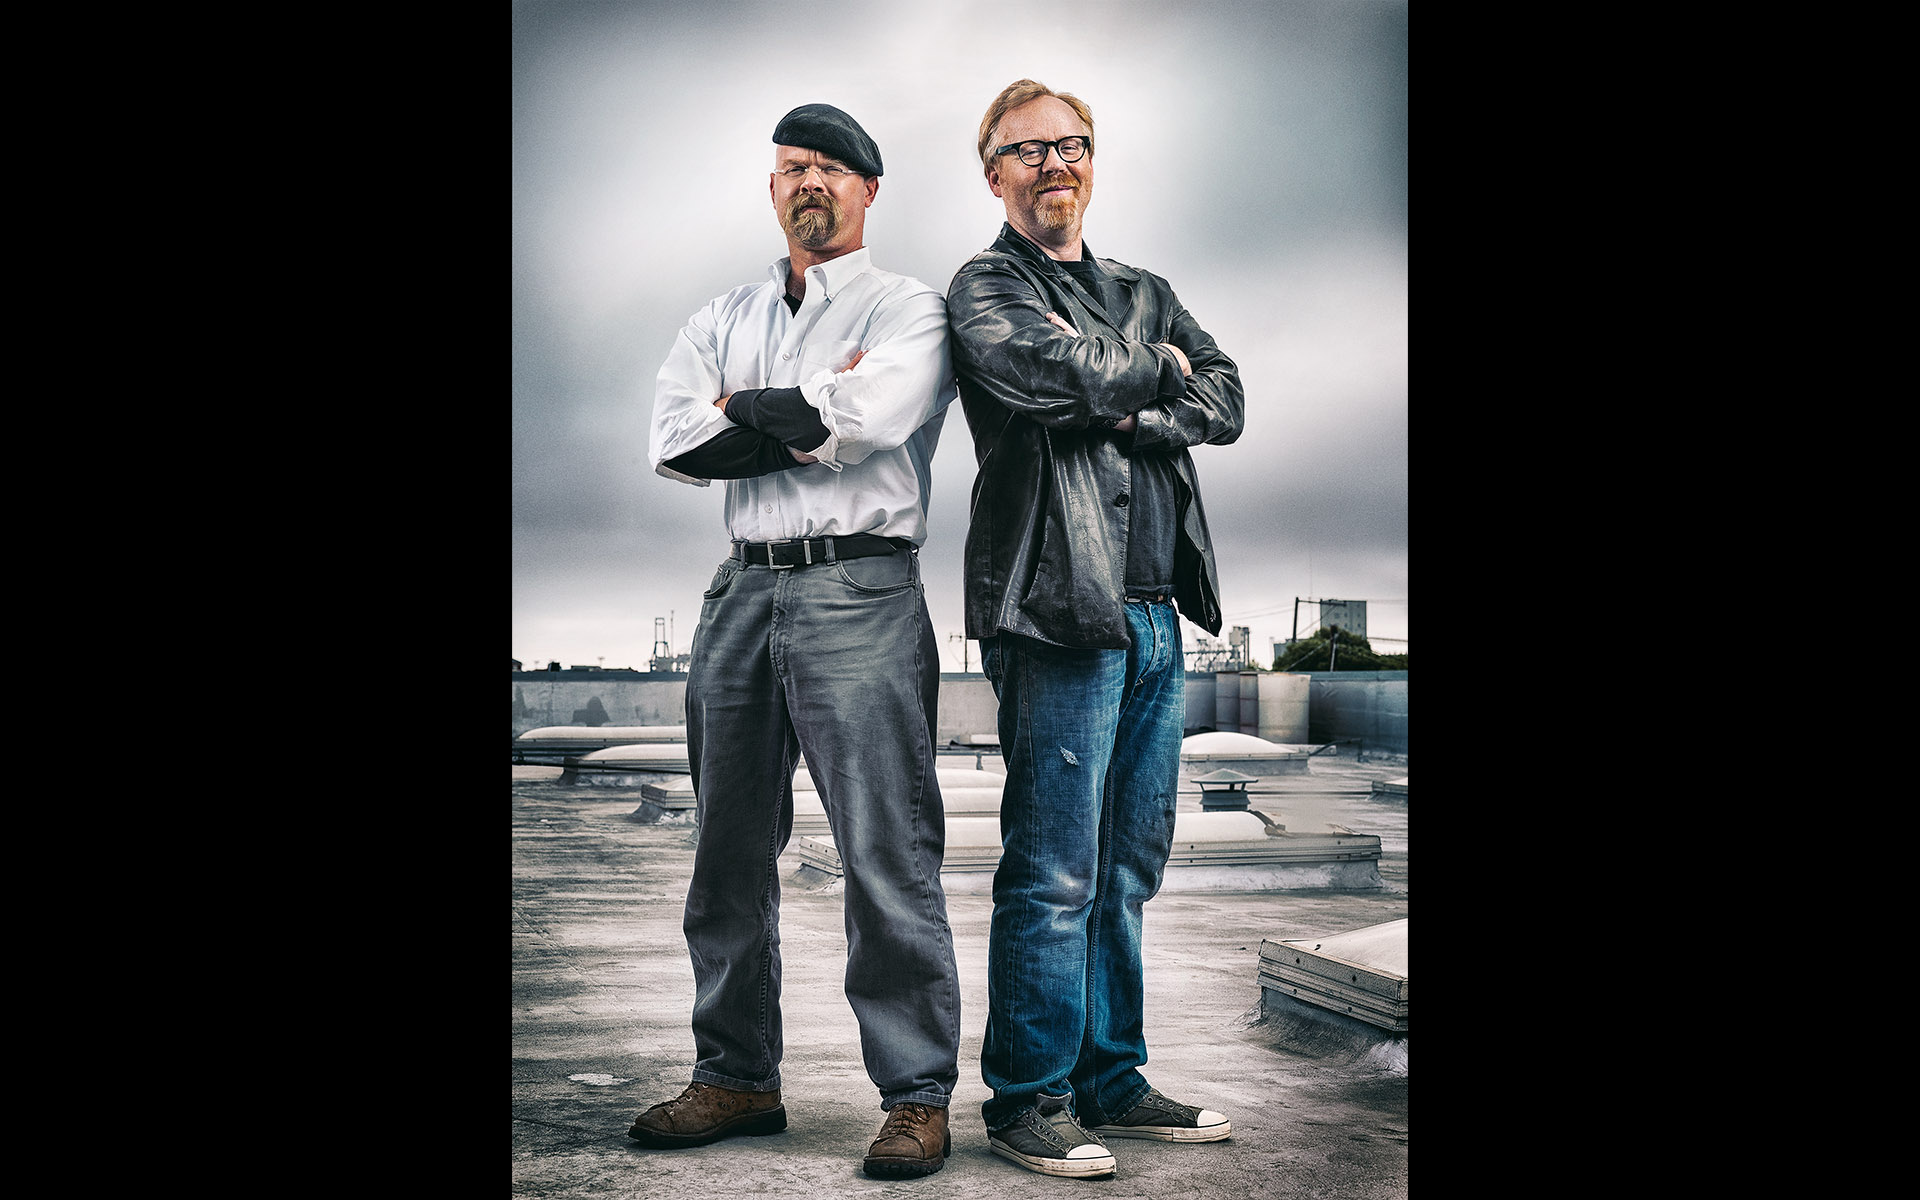 Mythbusters Discovery Channel ©B Bunting